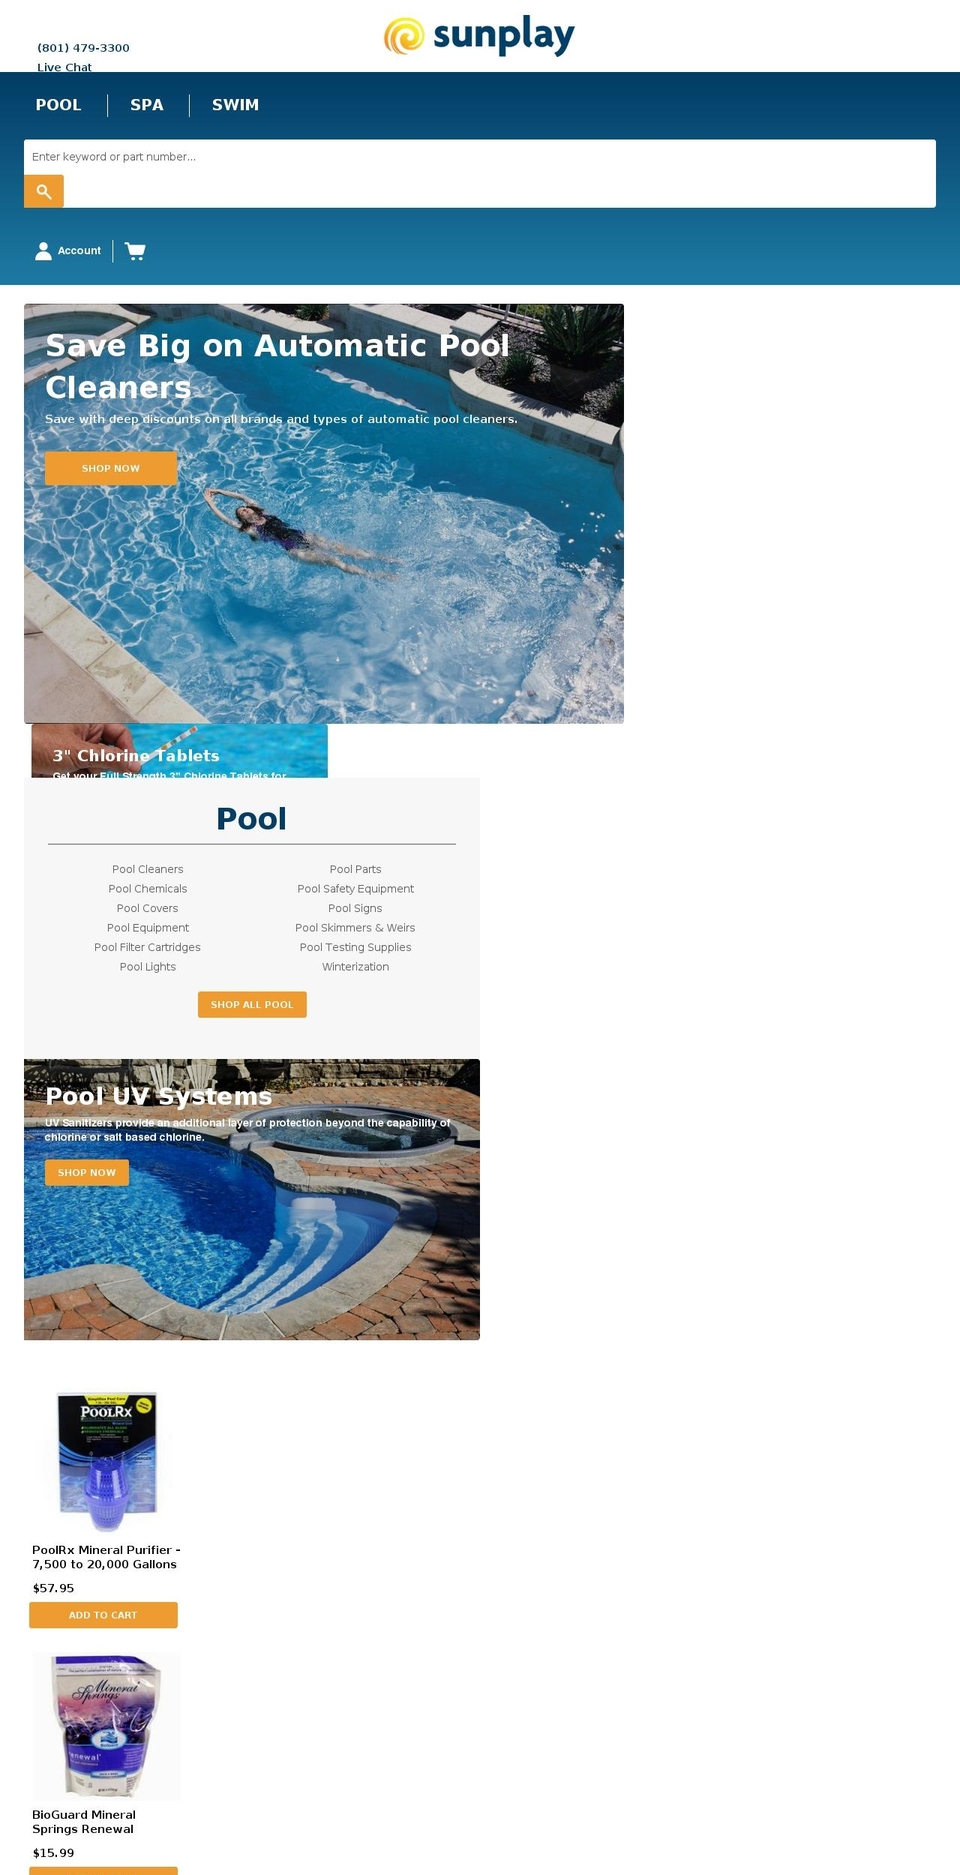 Sunplay v1.0 [Speck - Collection] Shopify theme site example sunplay.game